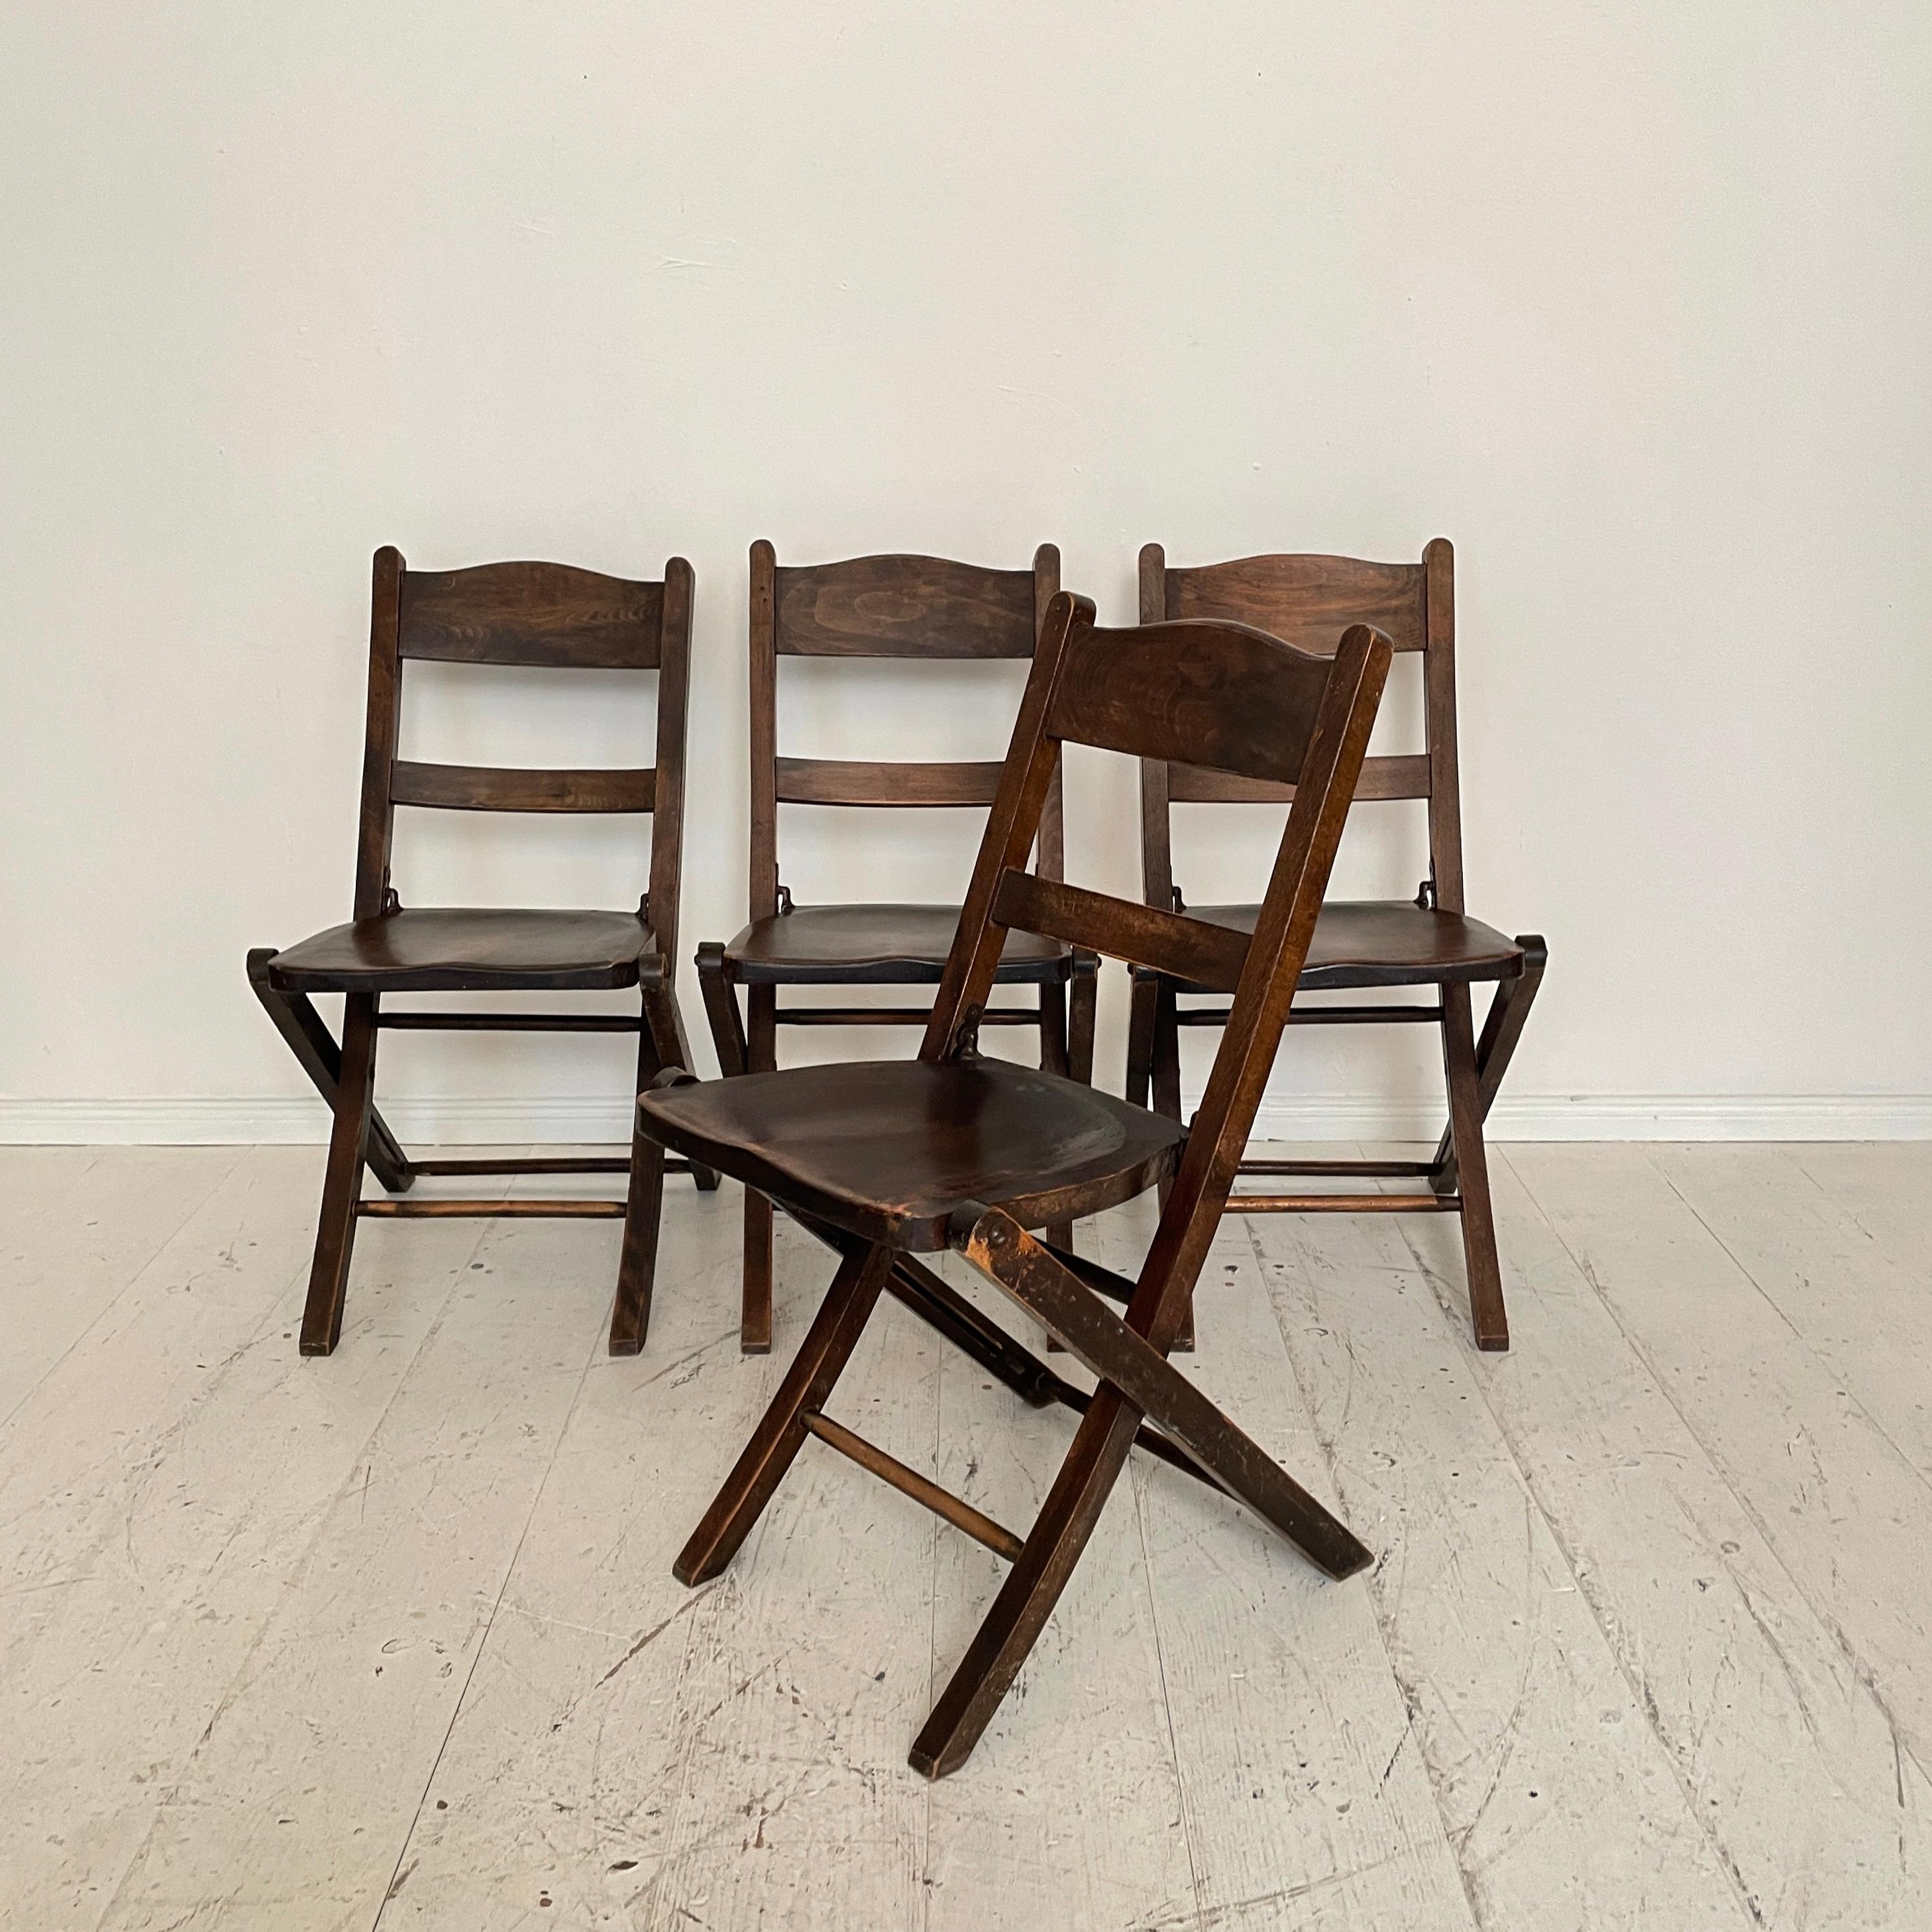 Set of 4 Art Deco Folding Chairs in Brown Beech and Ash, around 1930 For Sale 1